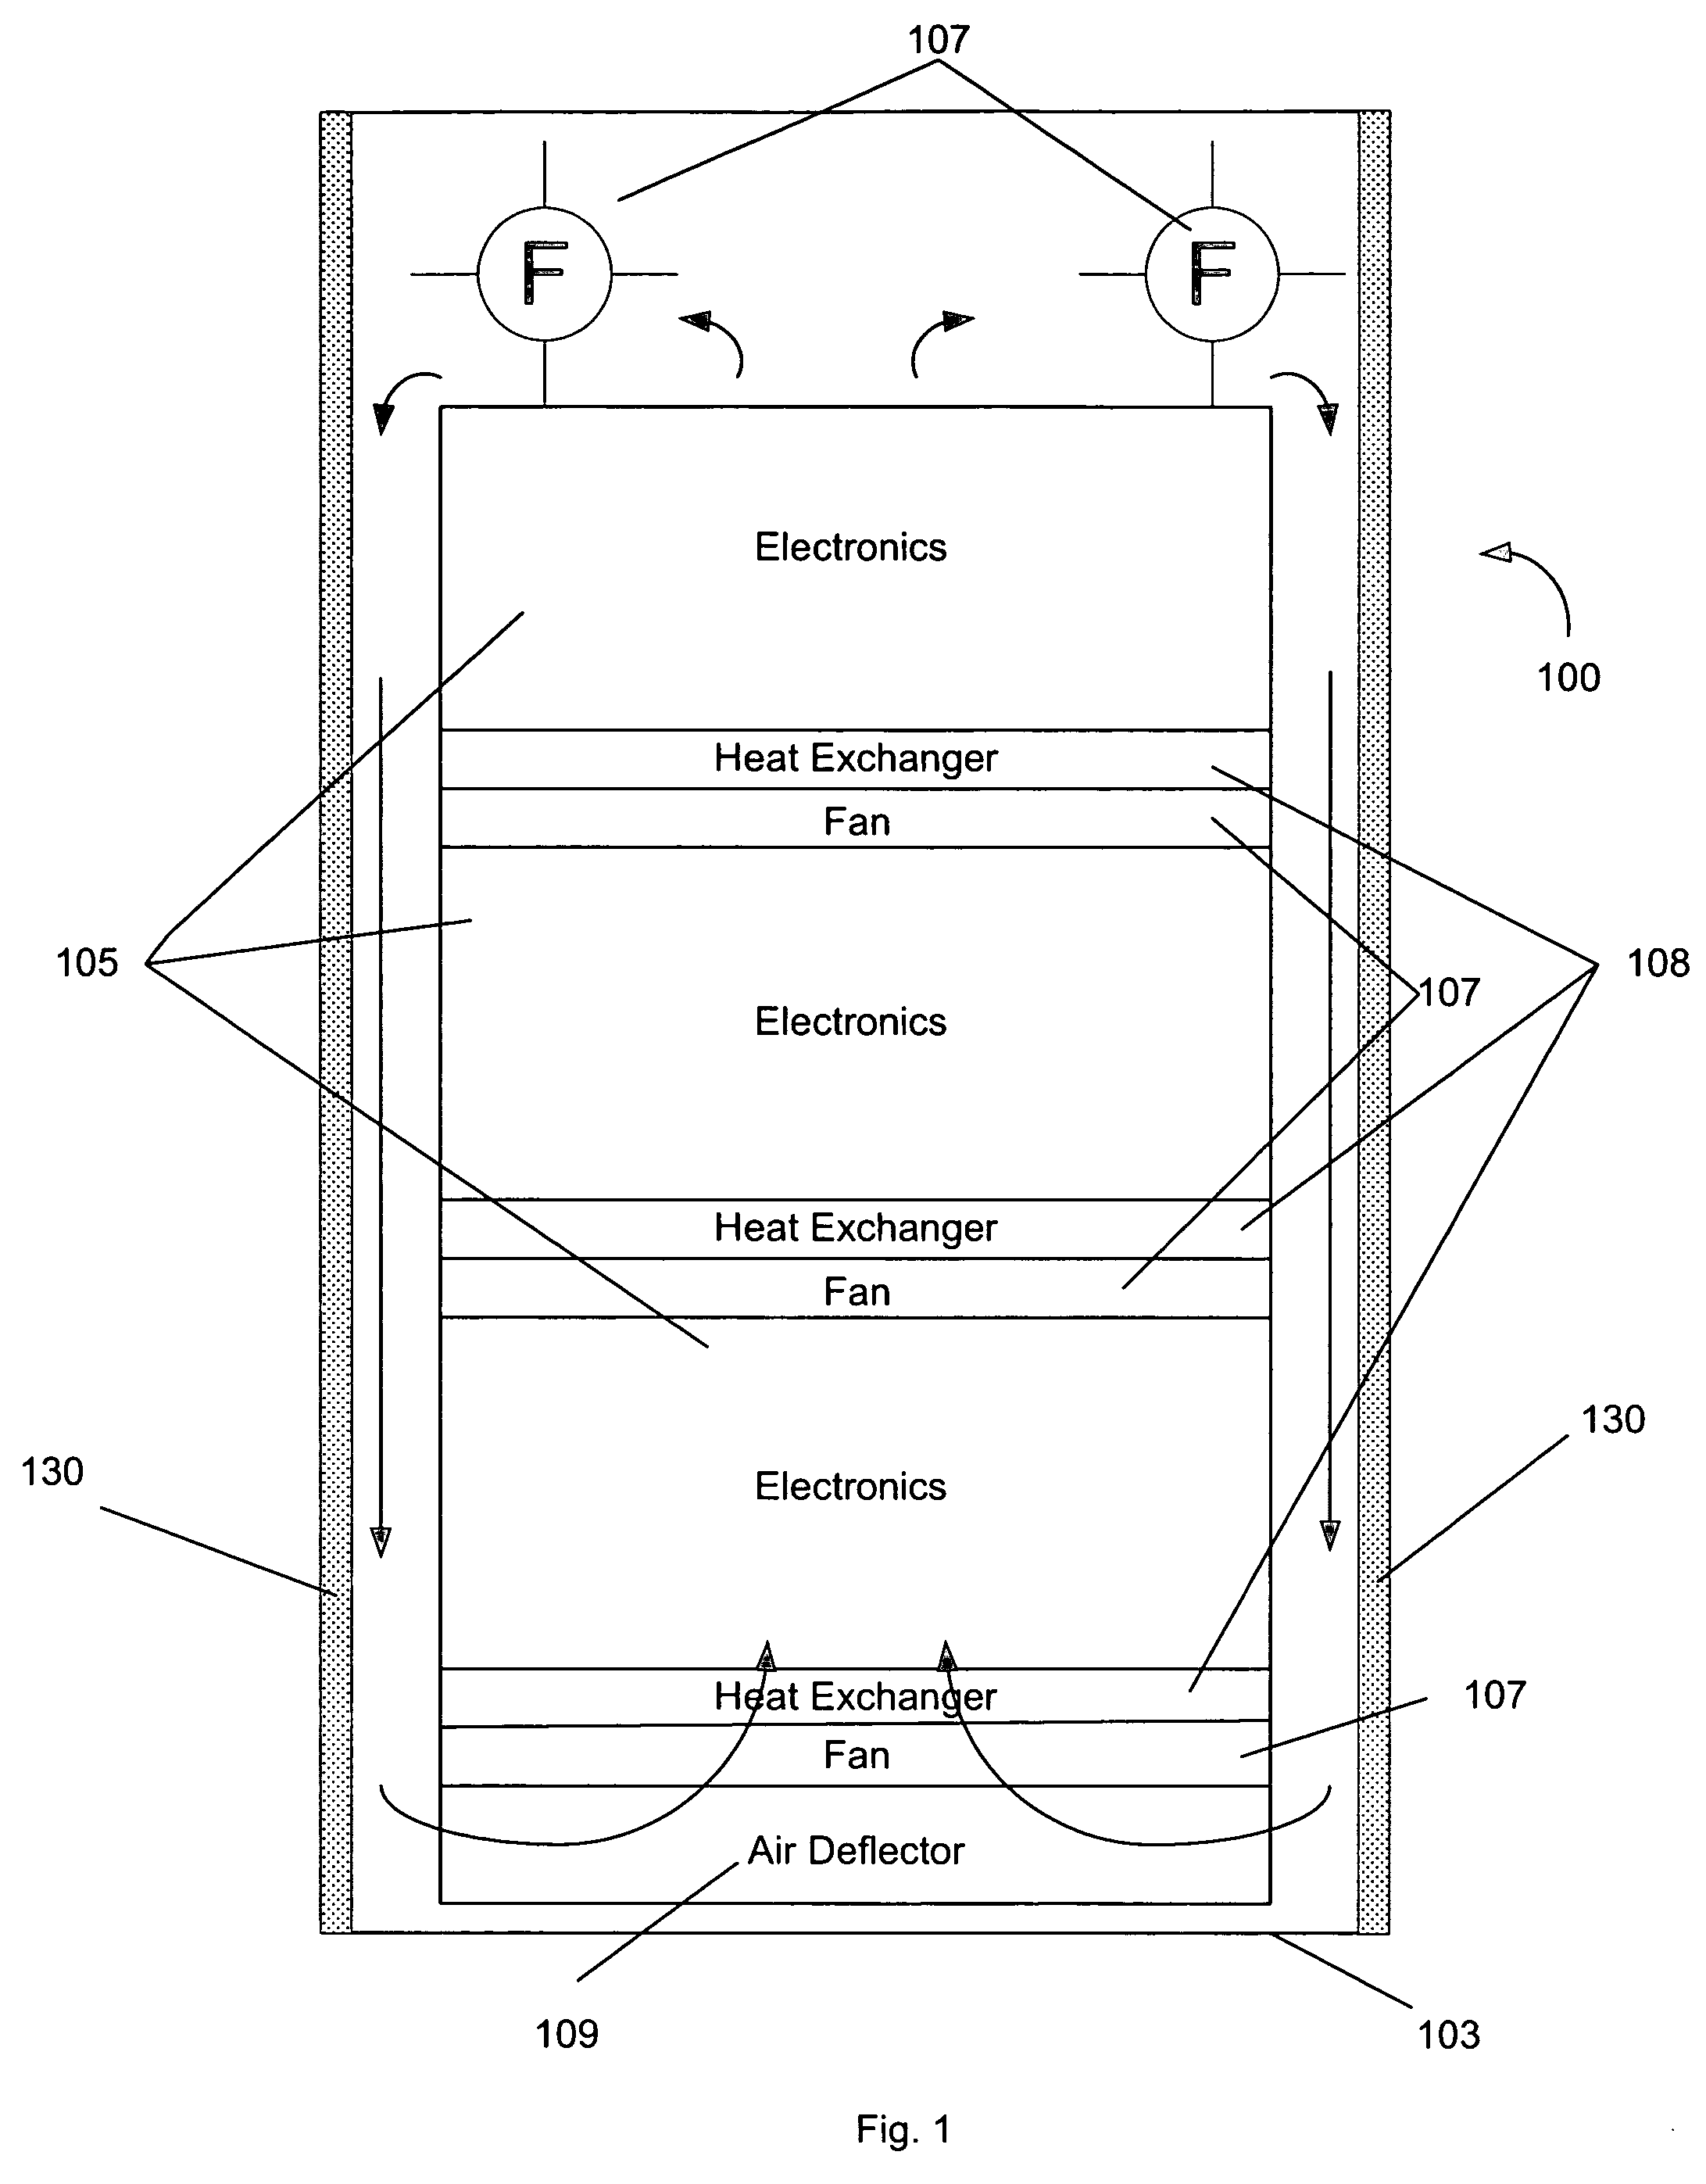 Cooling failure mitigation for an electronics enclosure